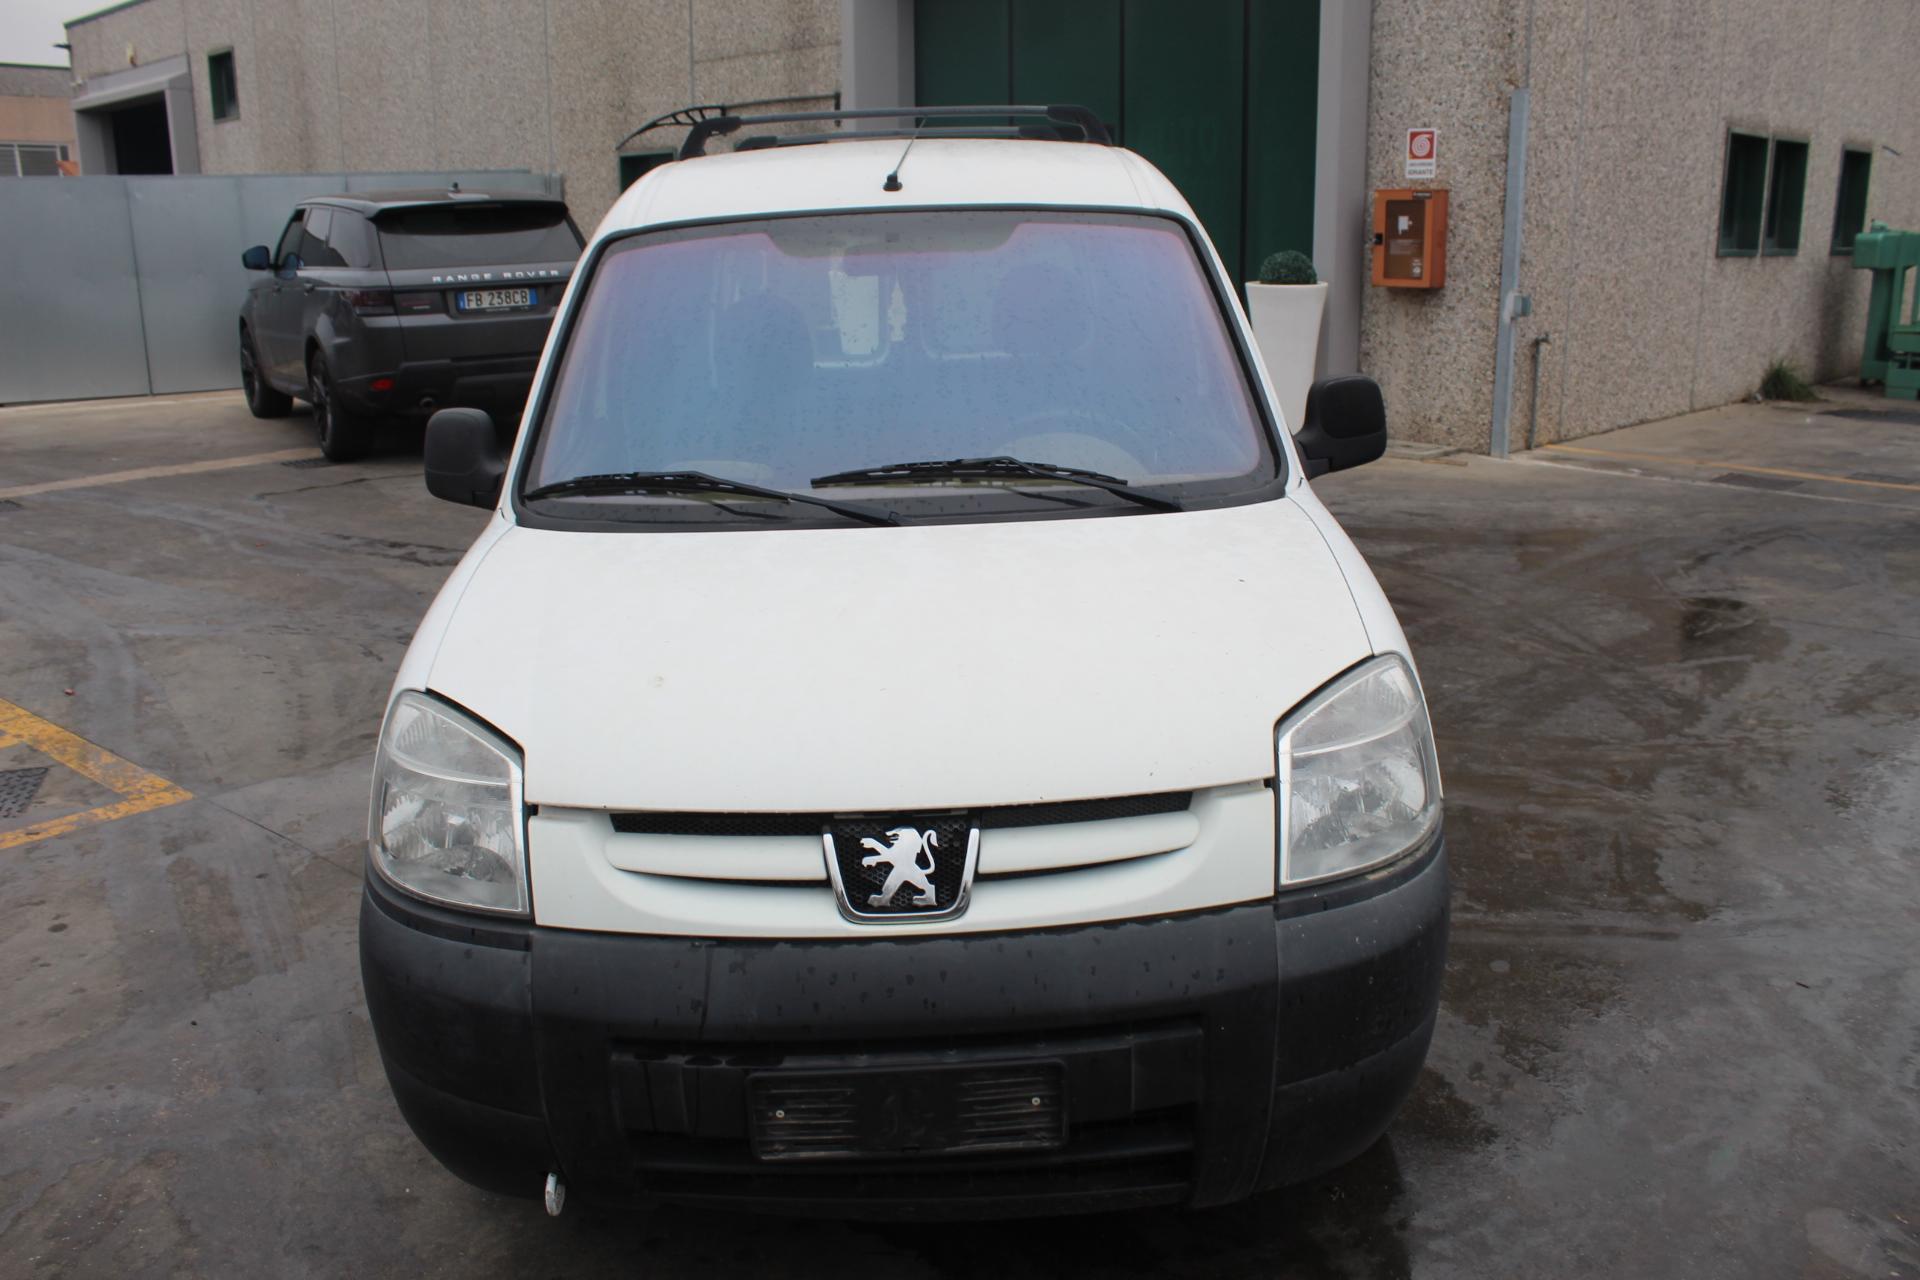 PEUGEOT RANCH 1.6 D 65KW 5M 4P (2008) RICAMBI IN MAGAZZINO